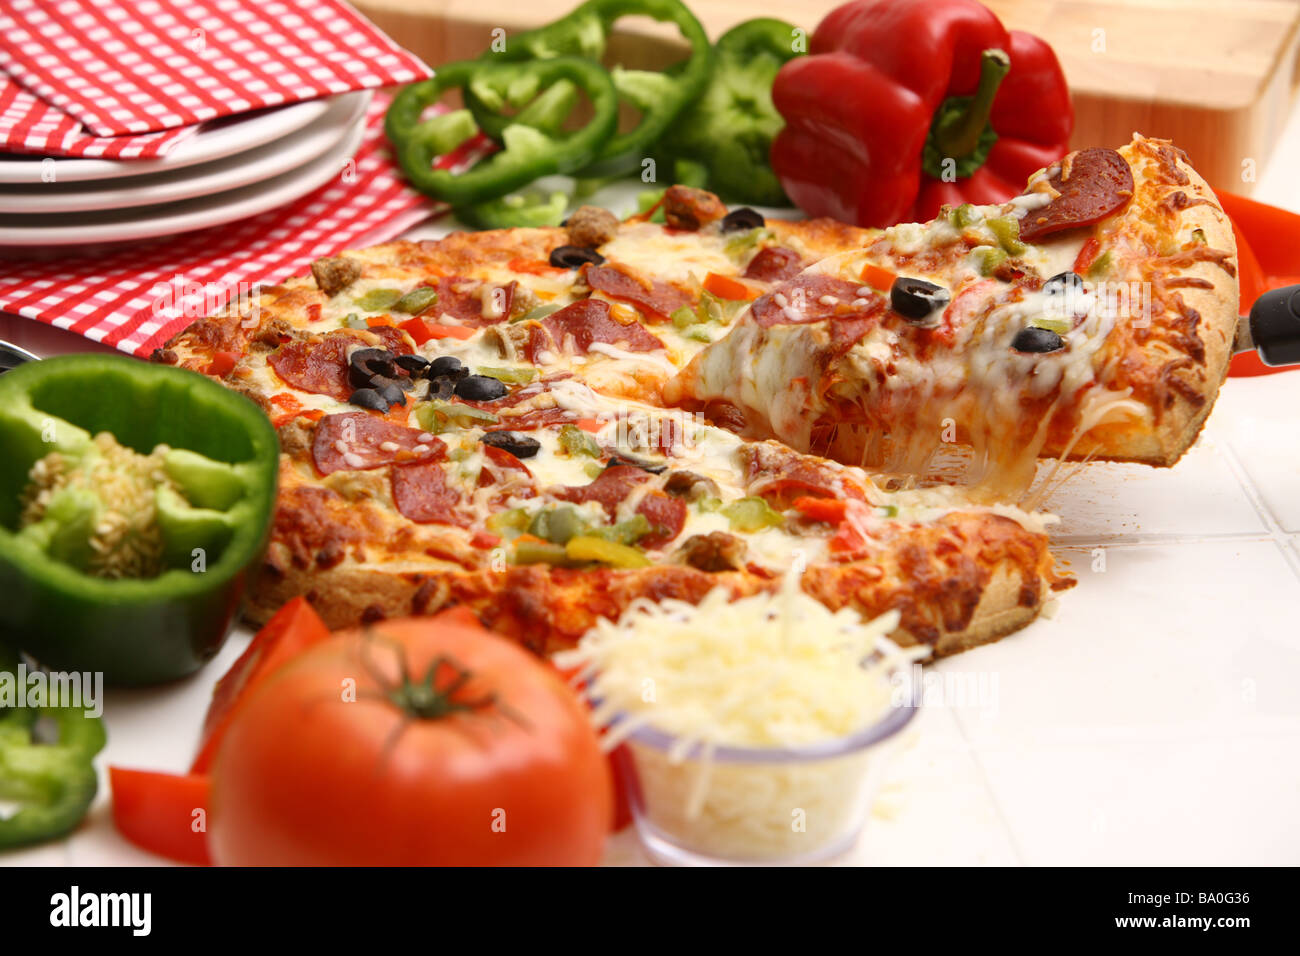 Slice of pizza and ingredients Stock Photo